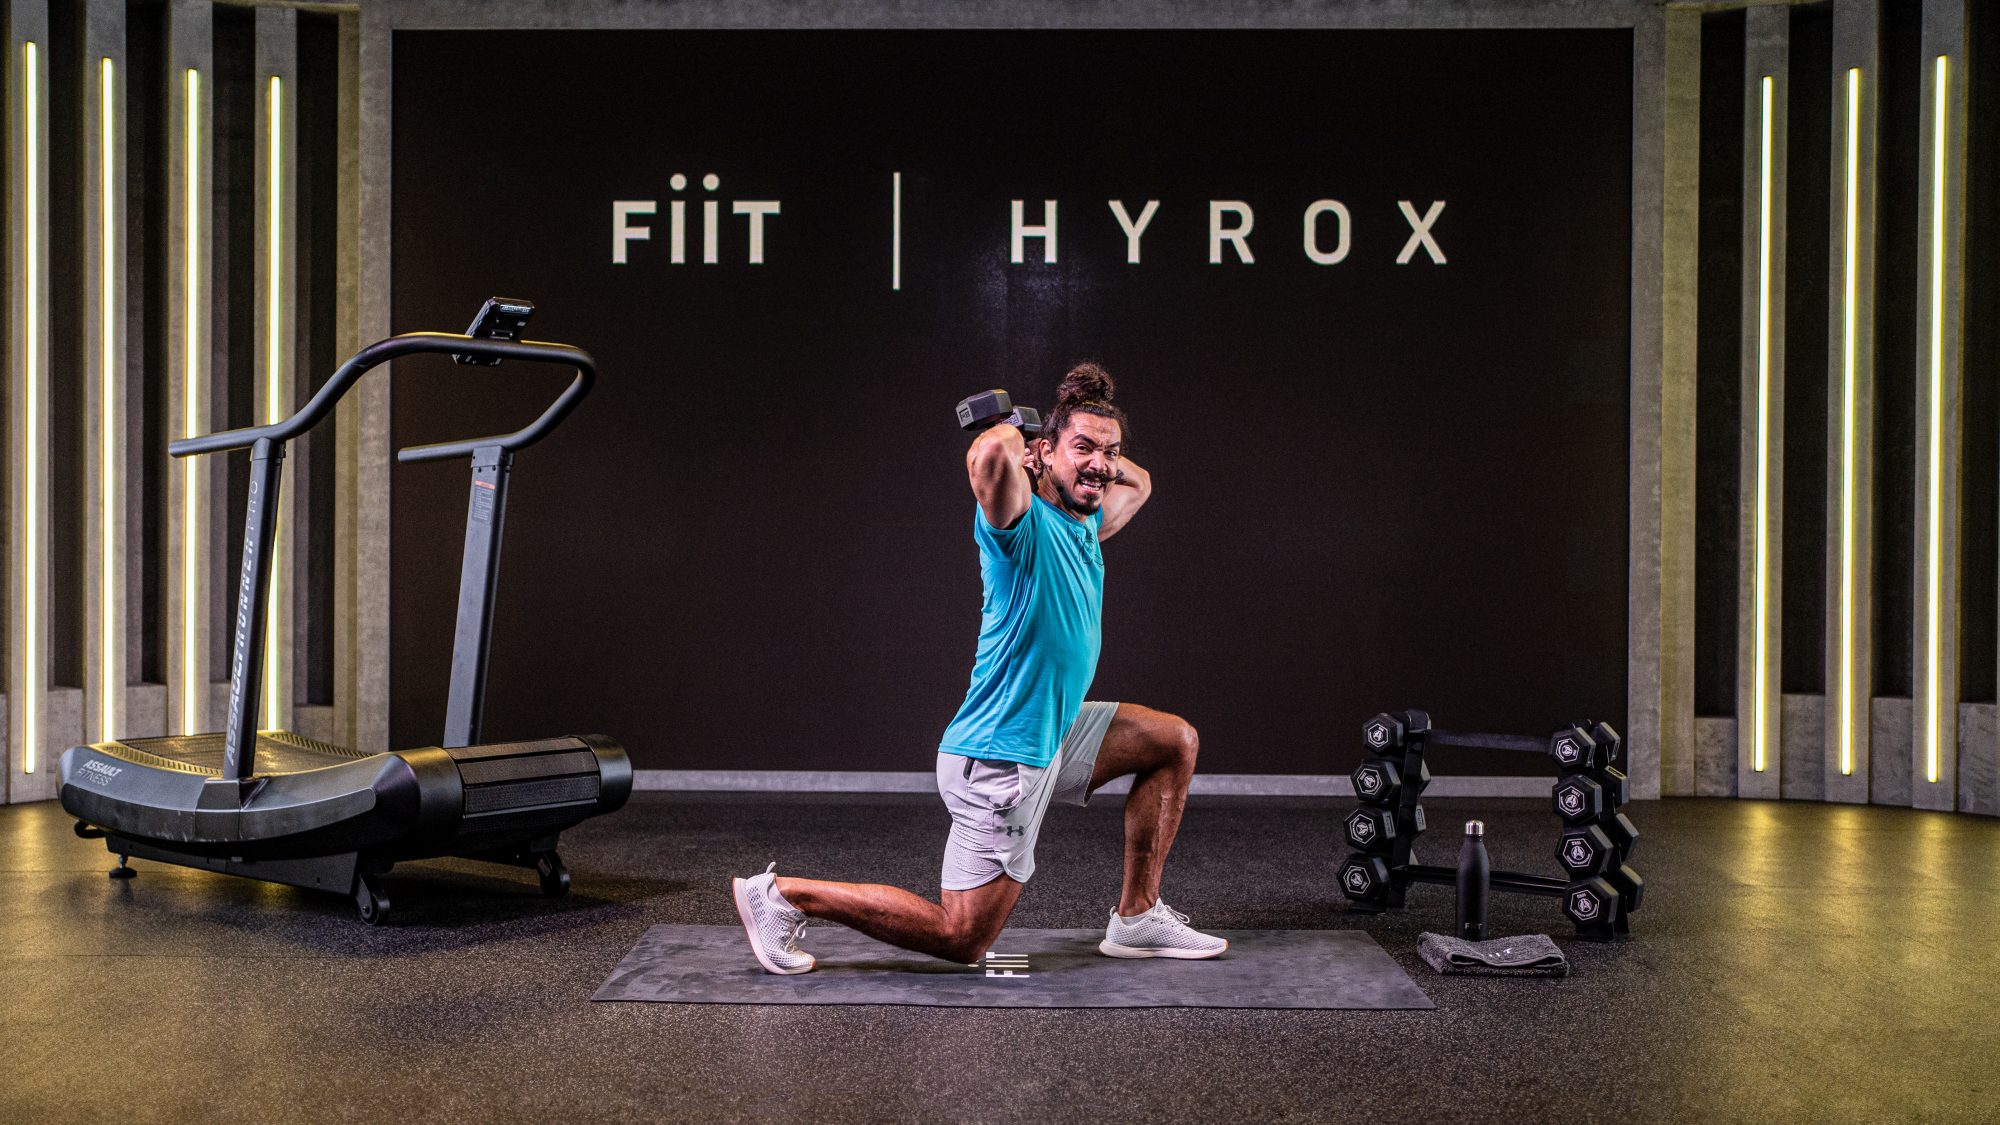 Get HYROX ready with FIIT 